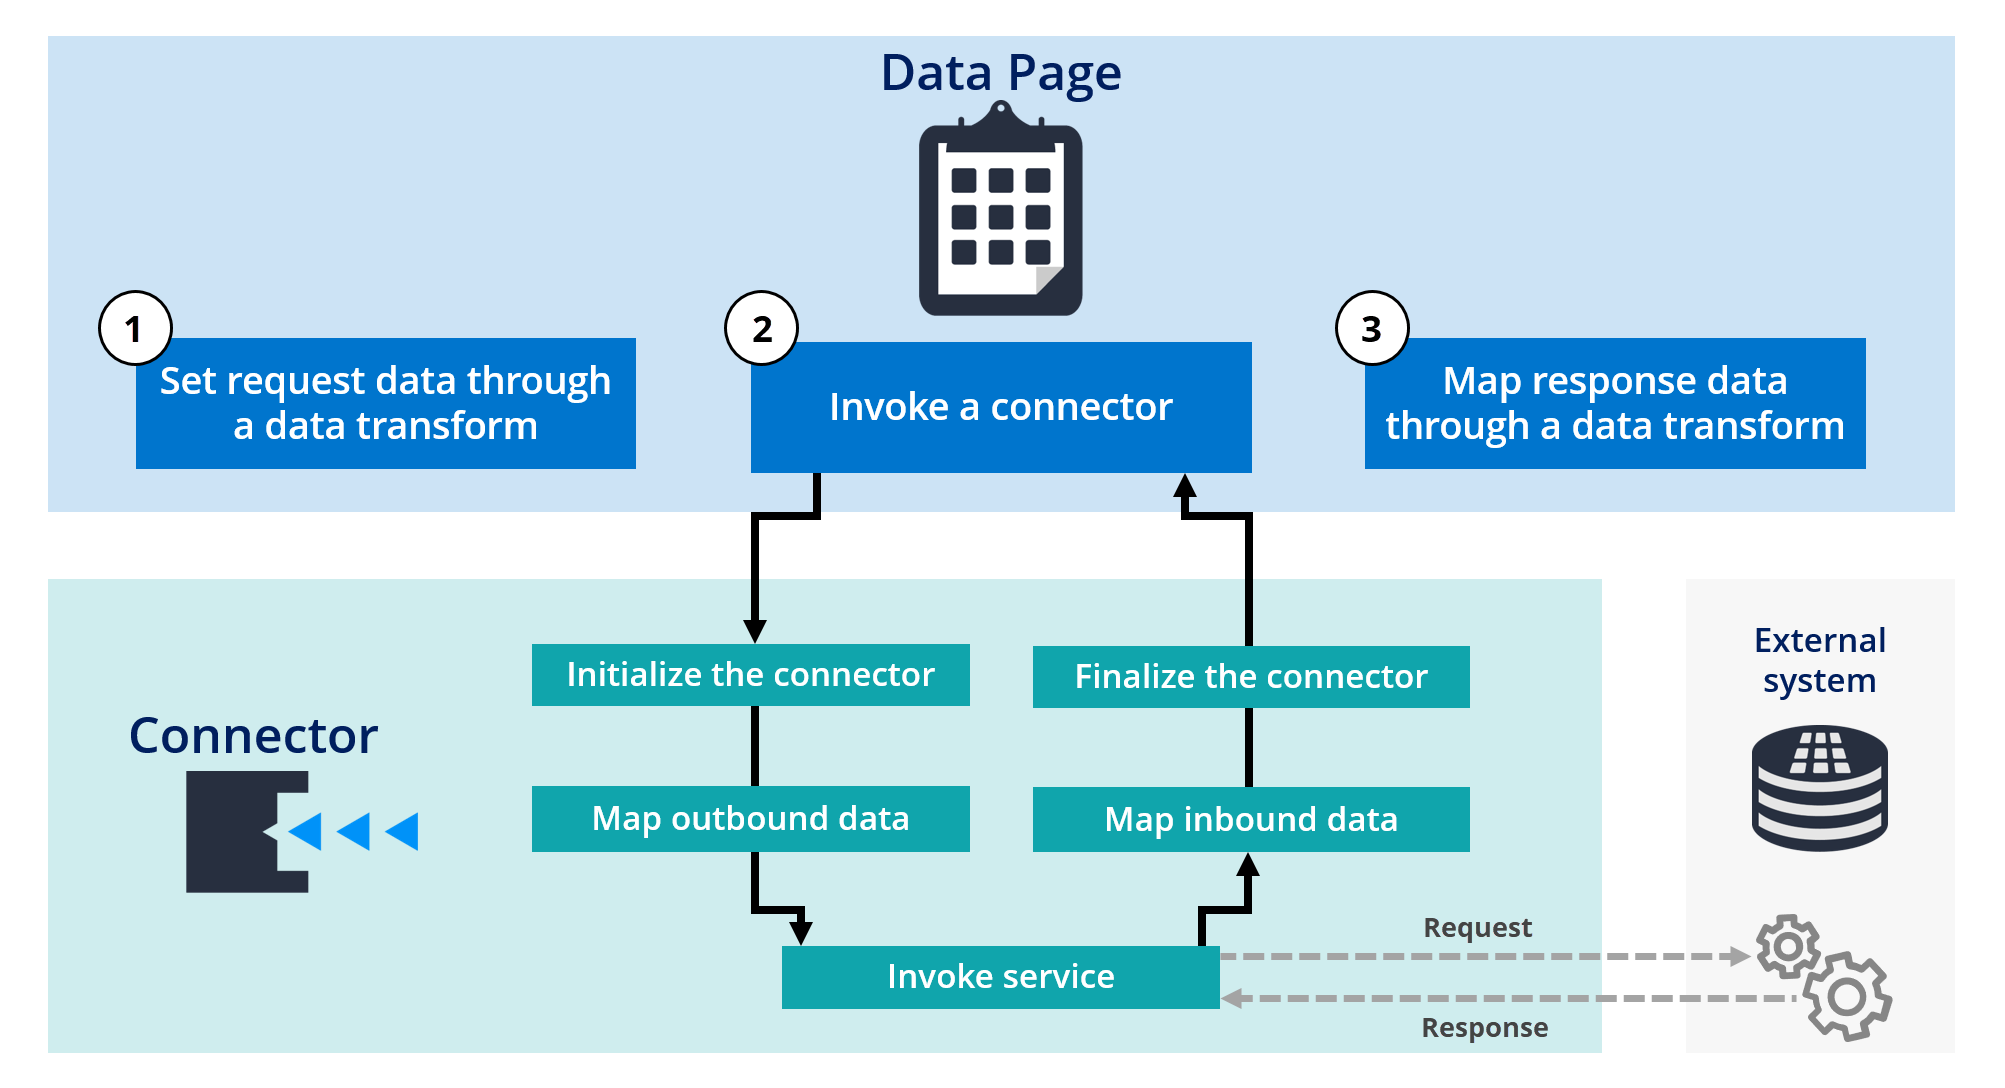 A diagram showing an integration with an external system by using a connector and data transforms to map response and request data.